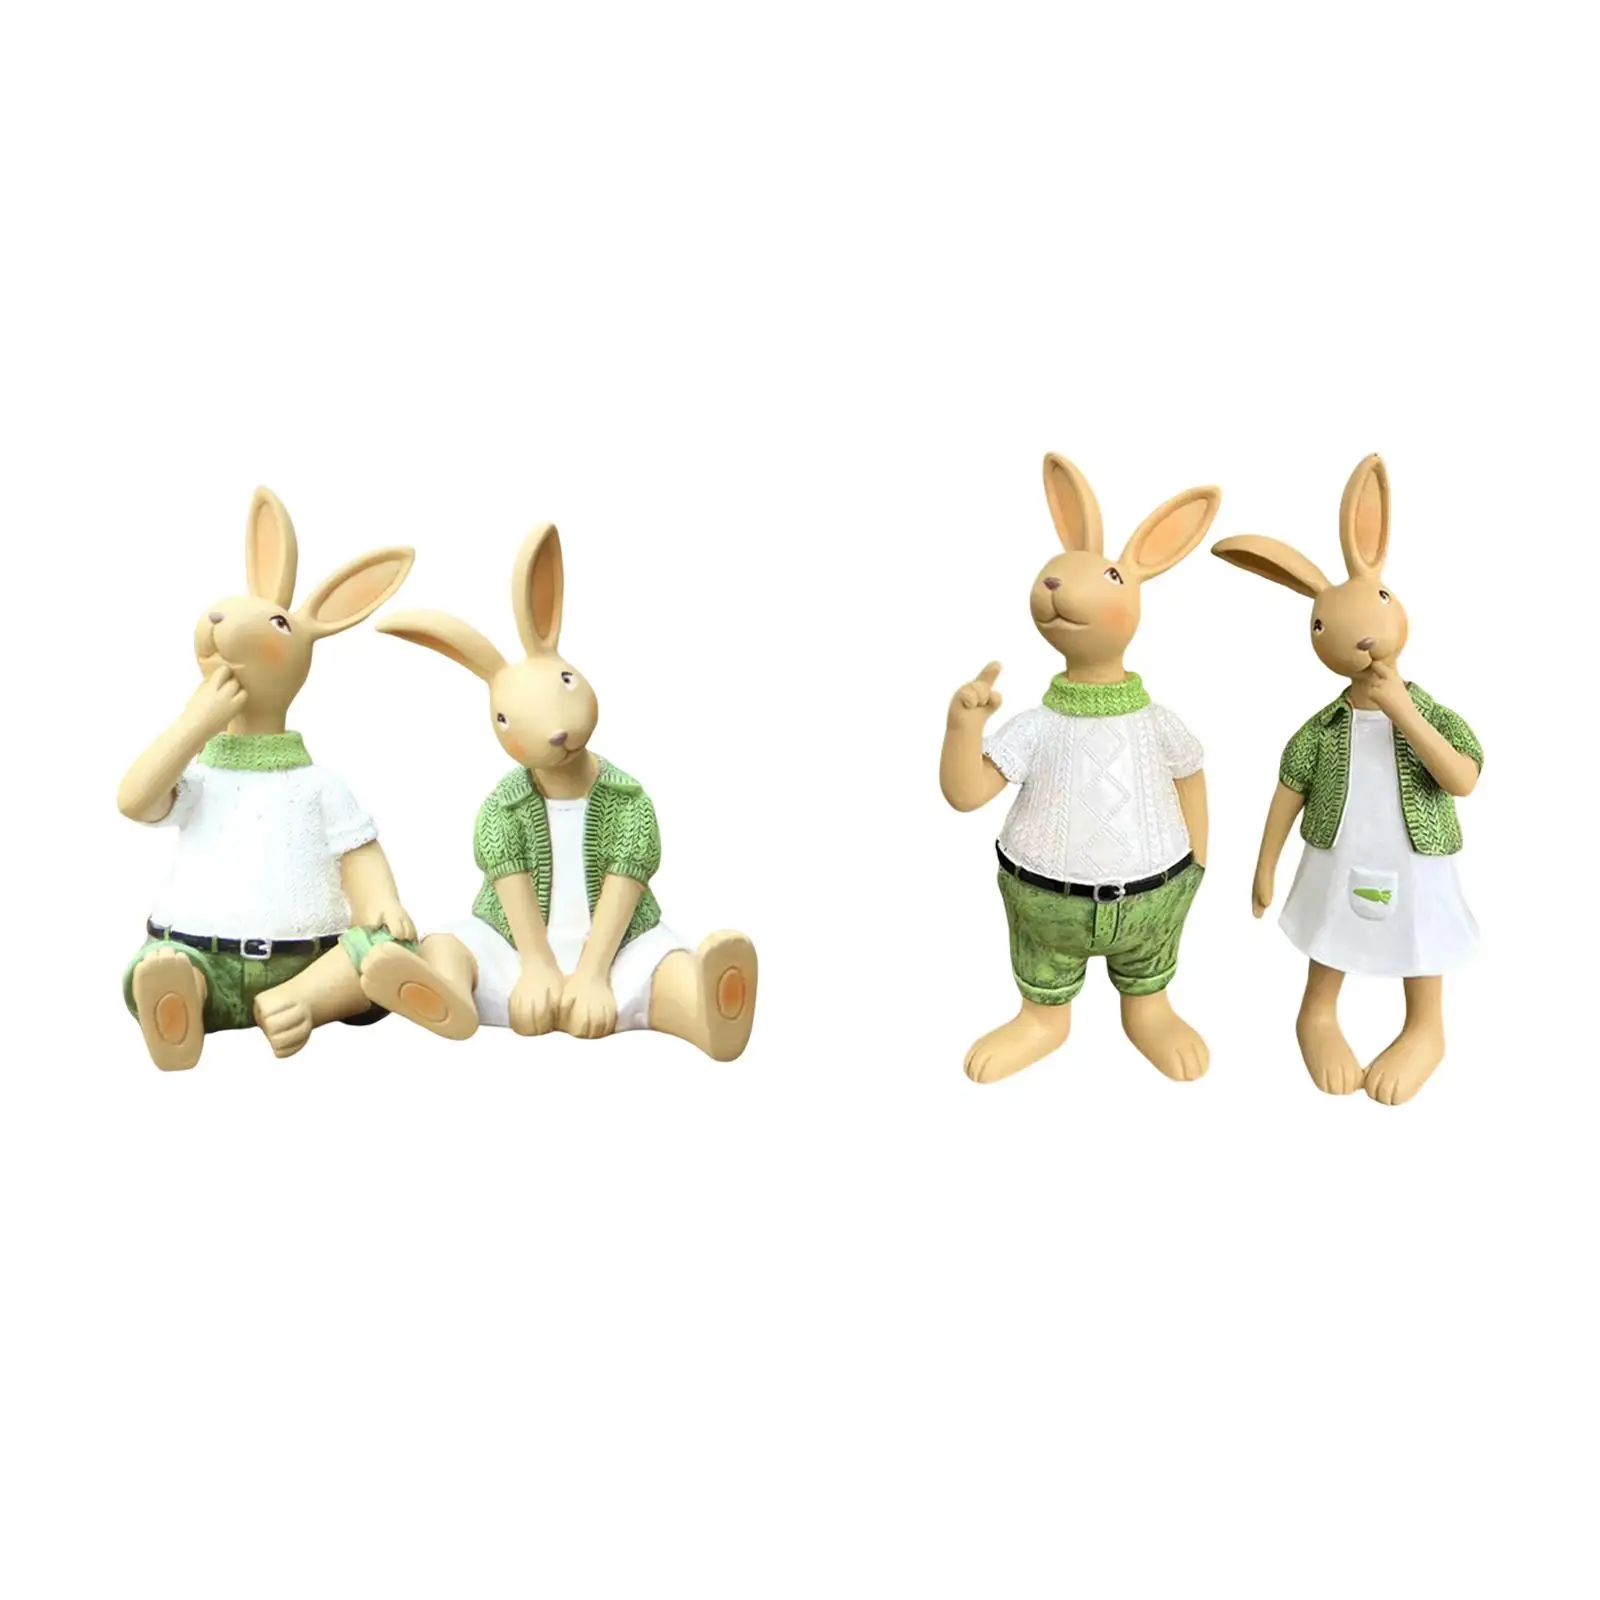 Easter Garden Statues Rabbit Party Decoration Animal Figurines Bunny Animal Figurines for Patio Lawn Backyard Tabletop Indoor